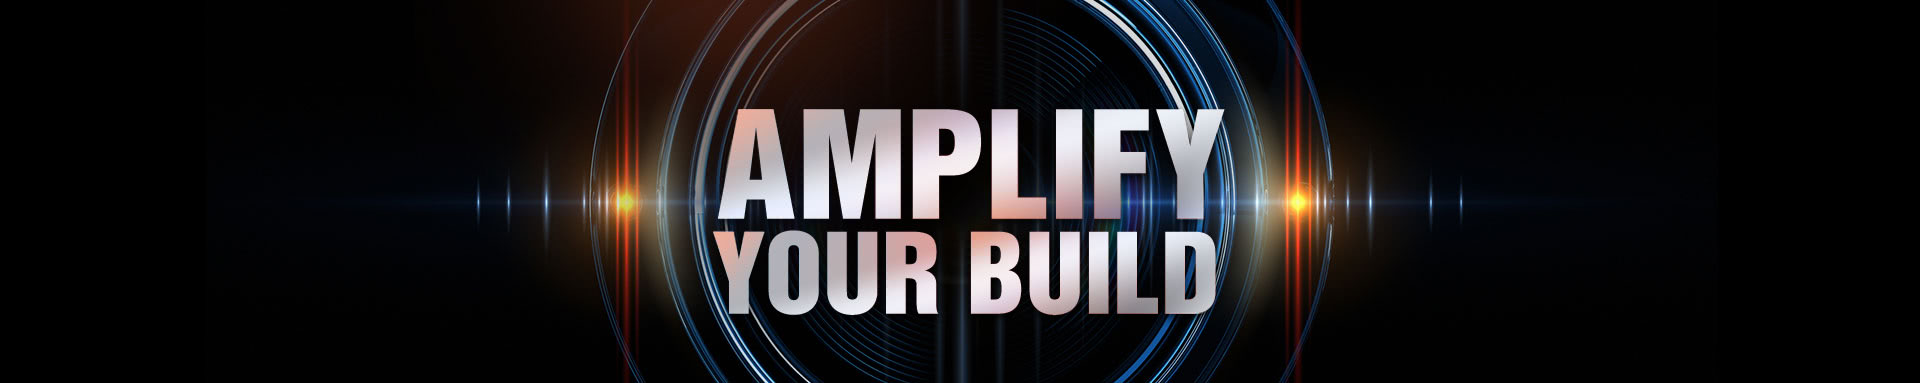 AMPLIFY YOUR BUILD